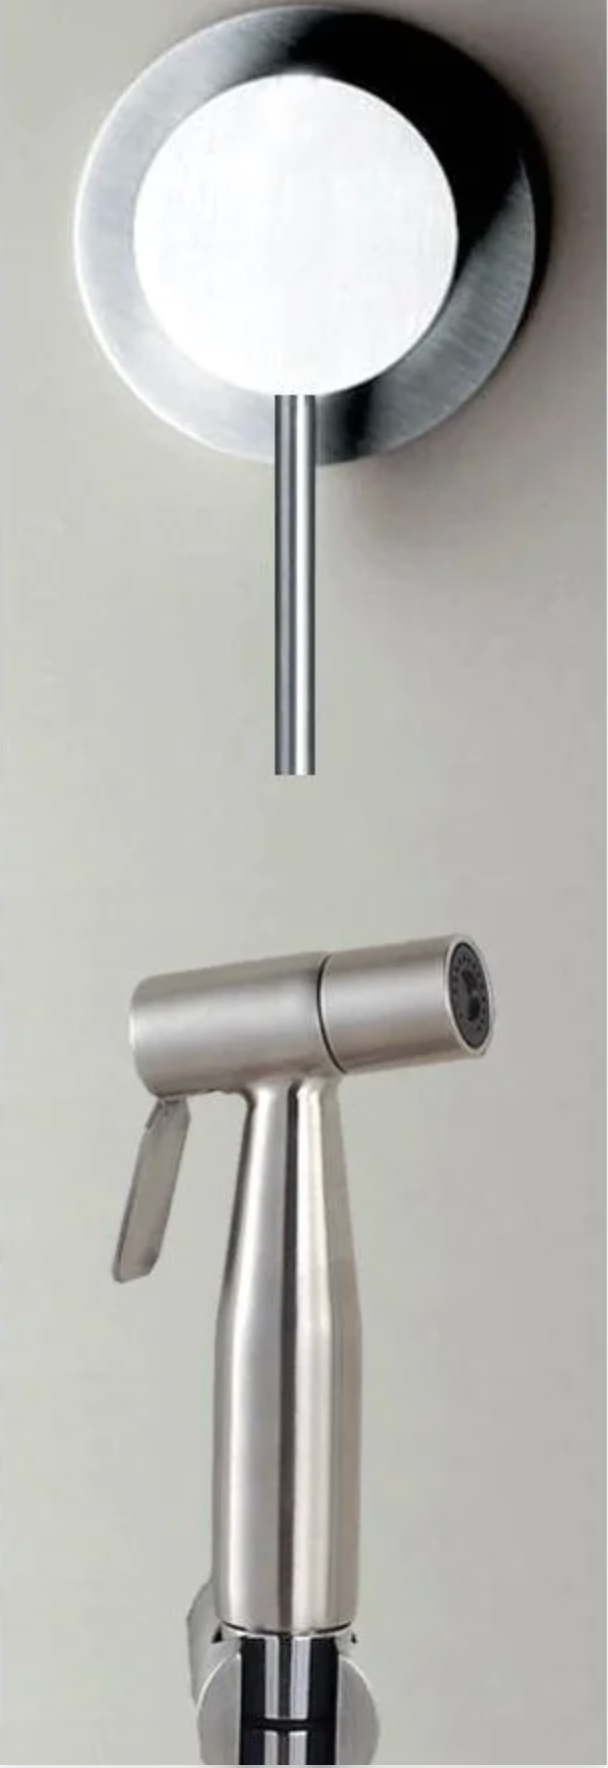 Built-in toilet shower set made of stainless steel (hot water)